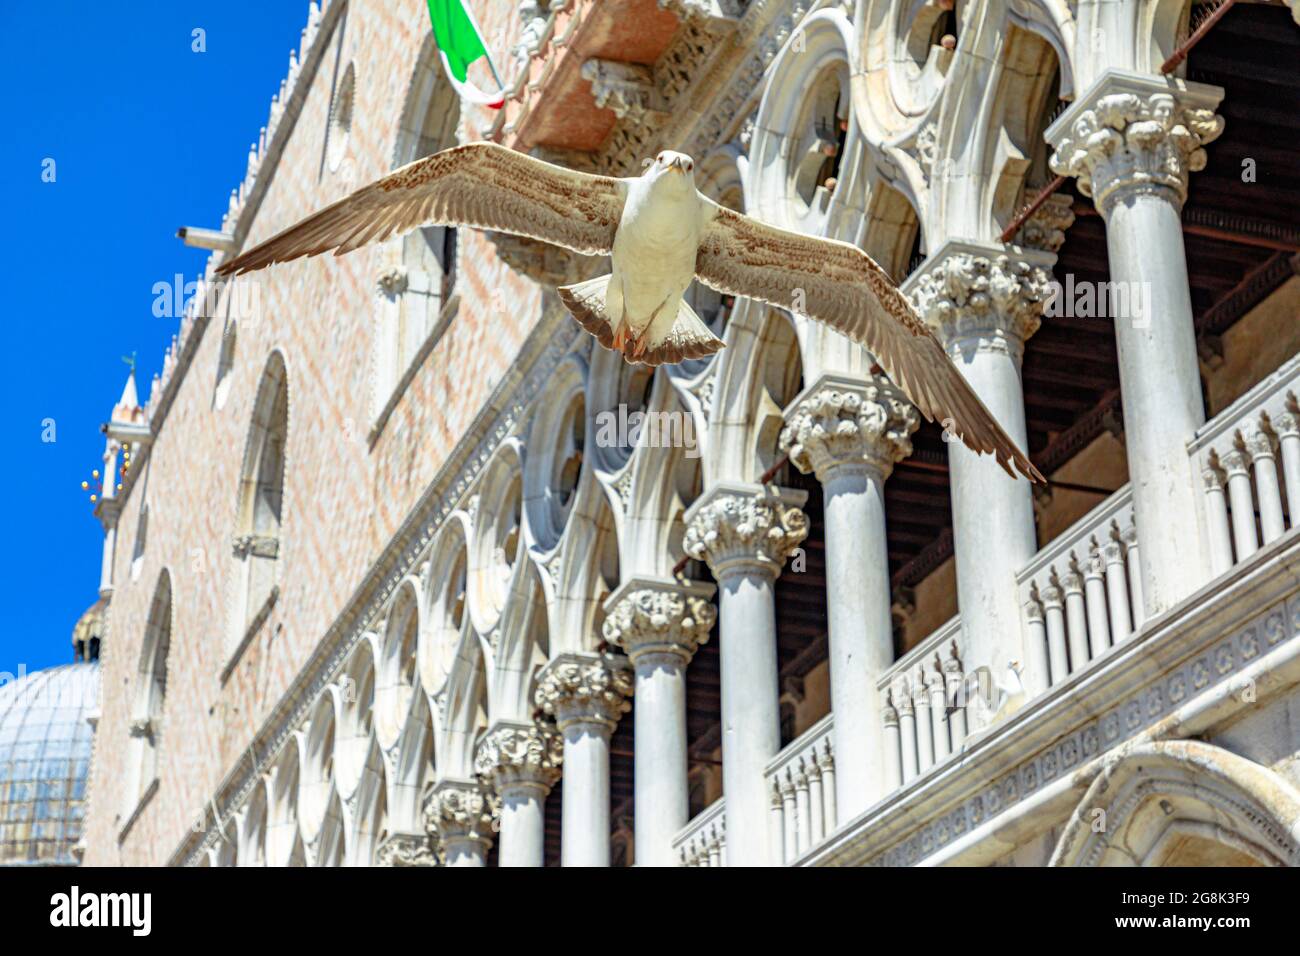 A flying seagull in San Marco Italian square of Venice city of Italy with Doge's palace colonnade behind. Stock Photo